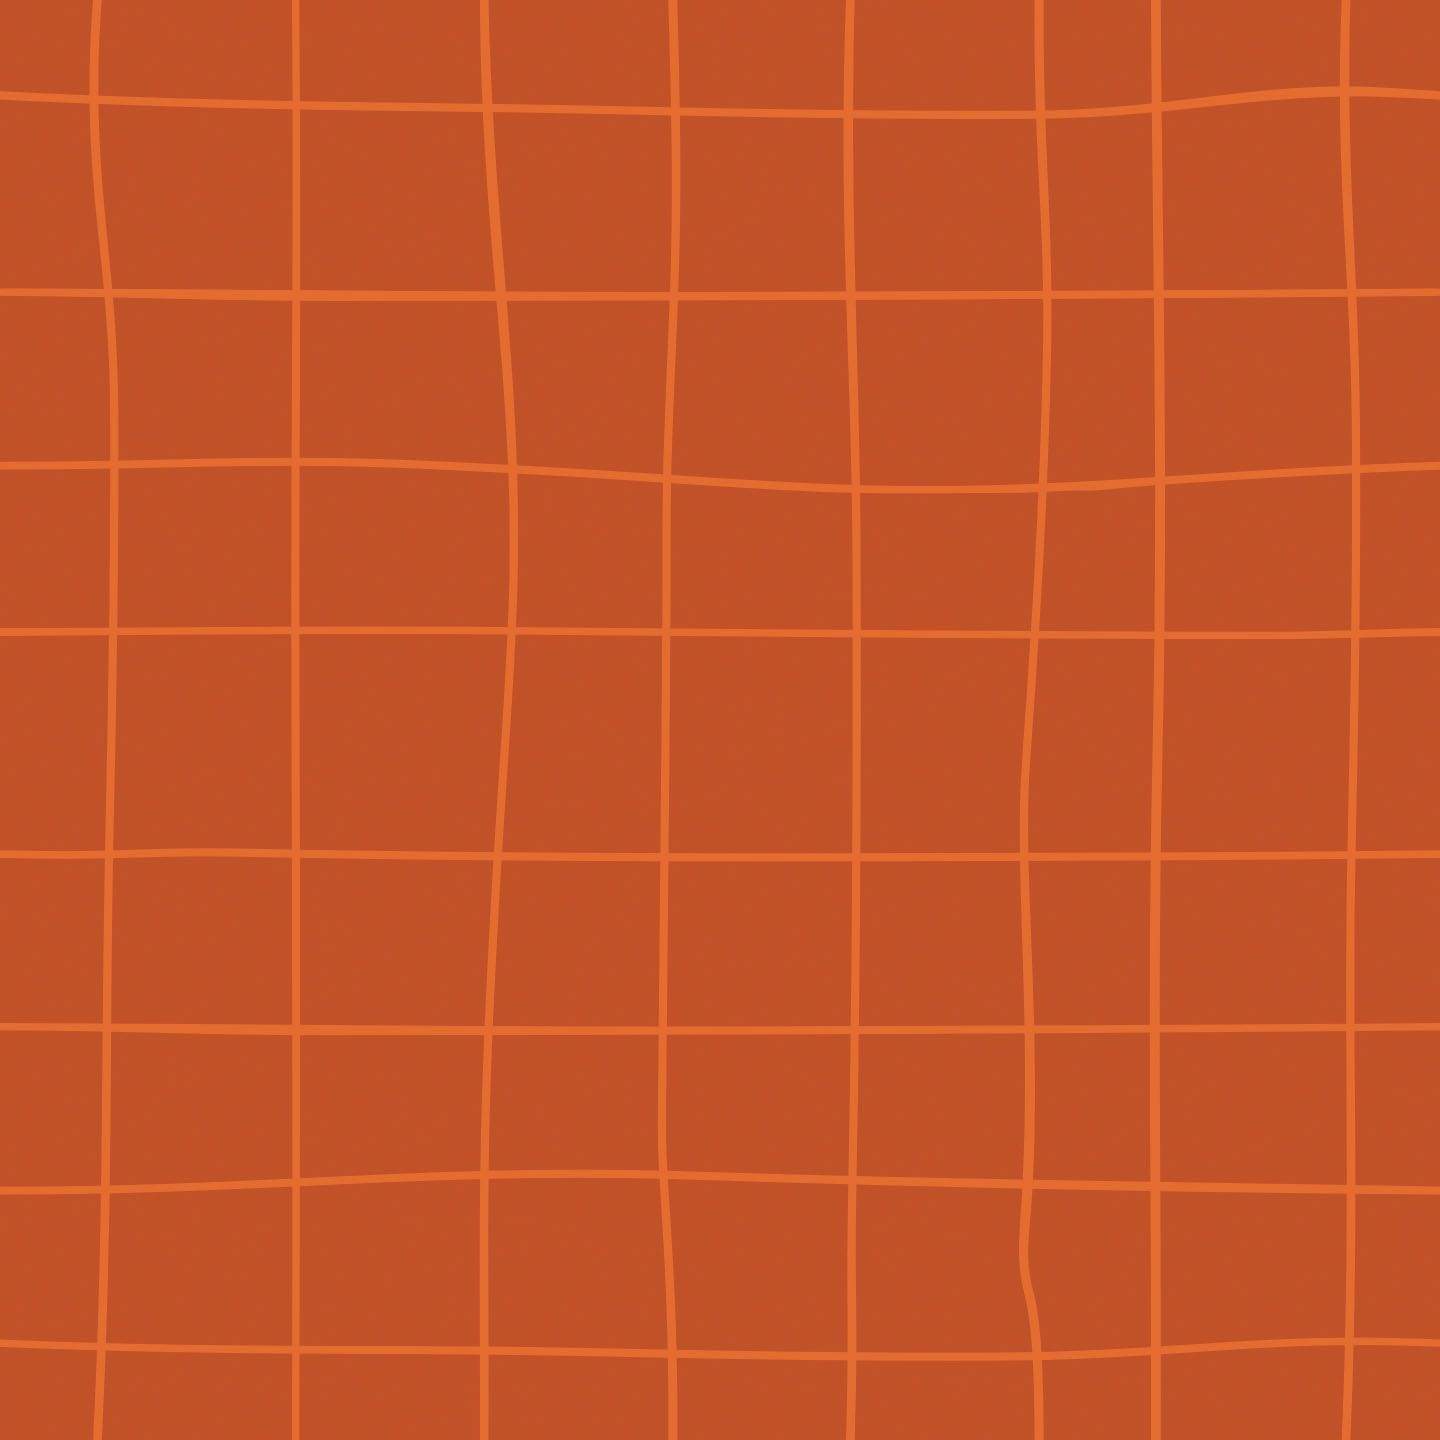 An orange background with a grid of orange lines - Terracotta